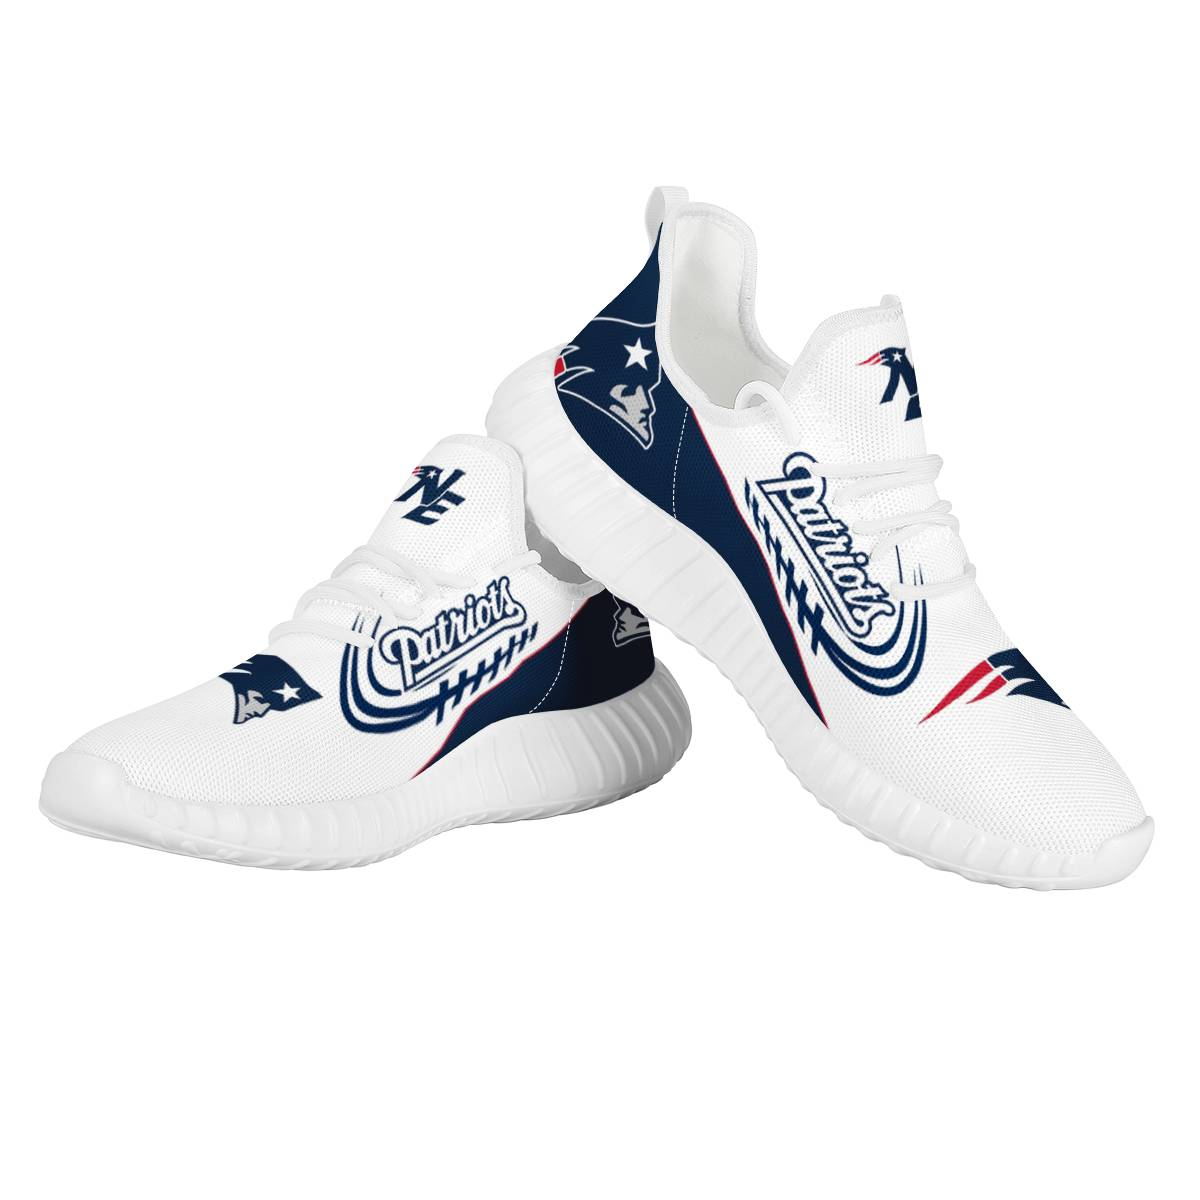 Women's New England Patriots Mesh Knit Sneakers/Shoes 012